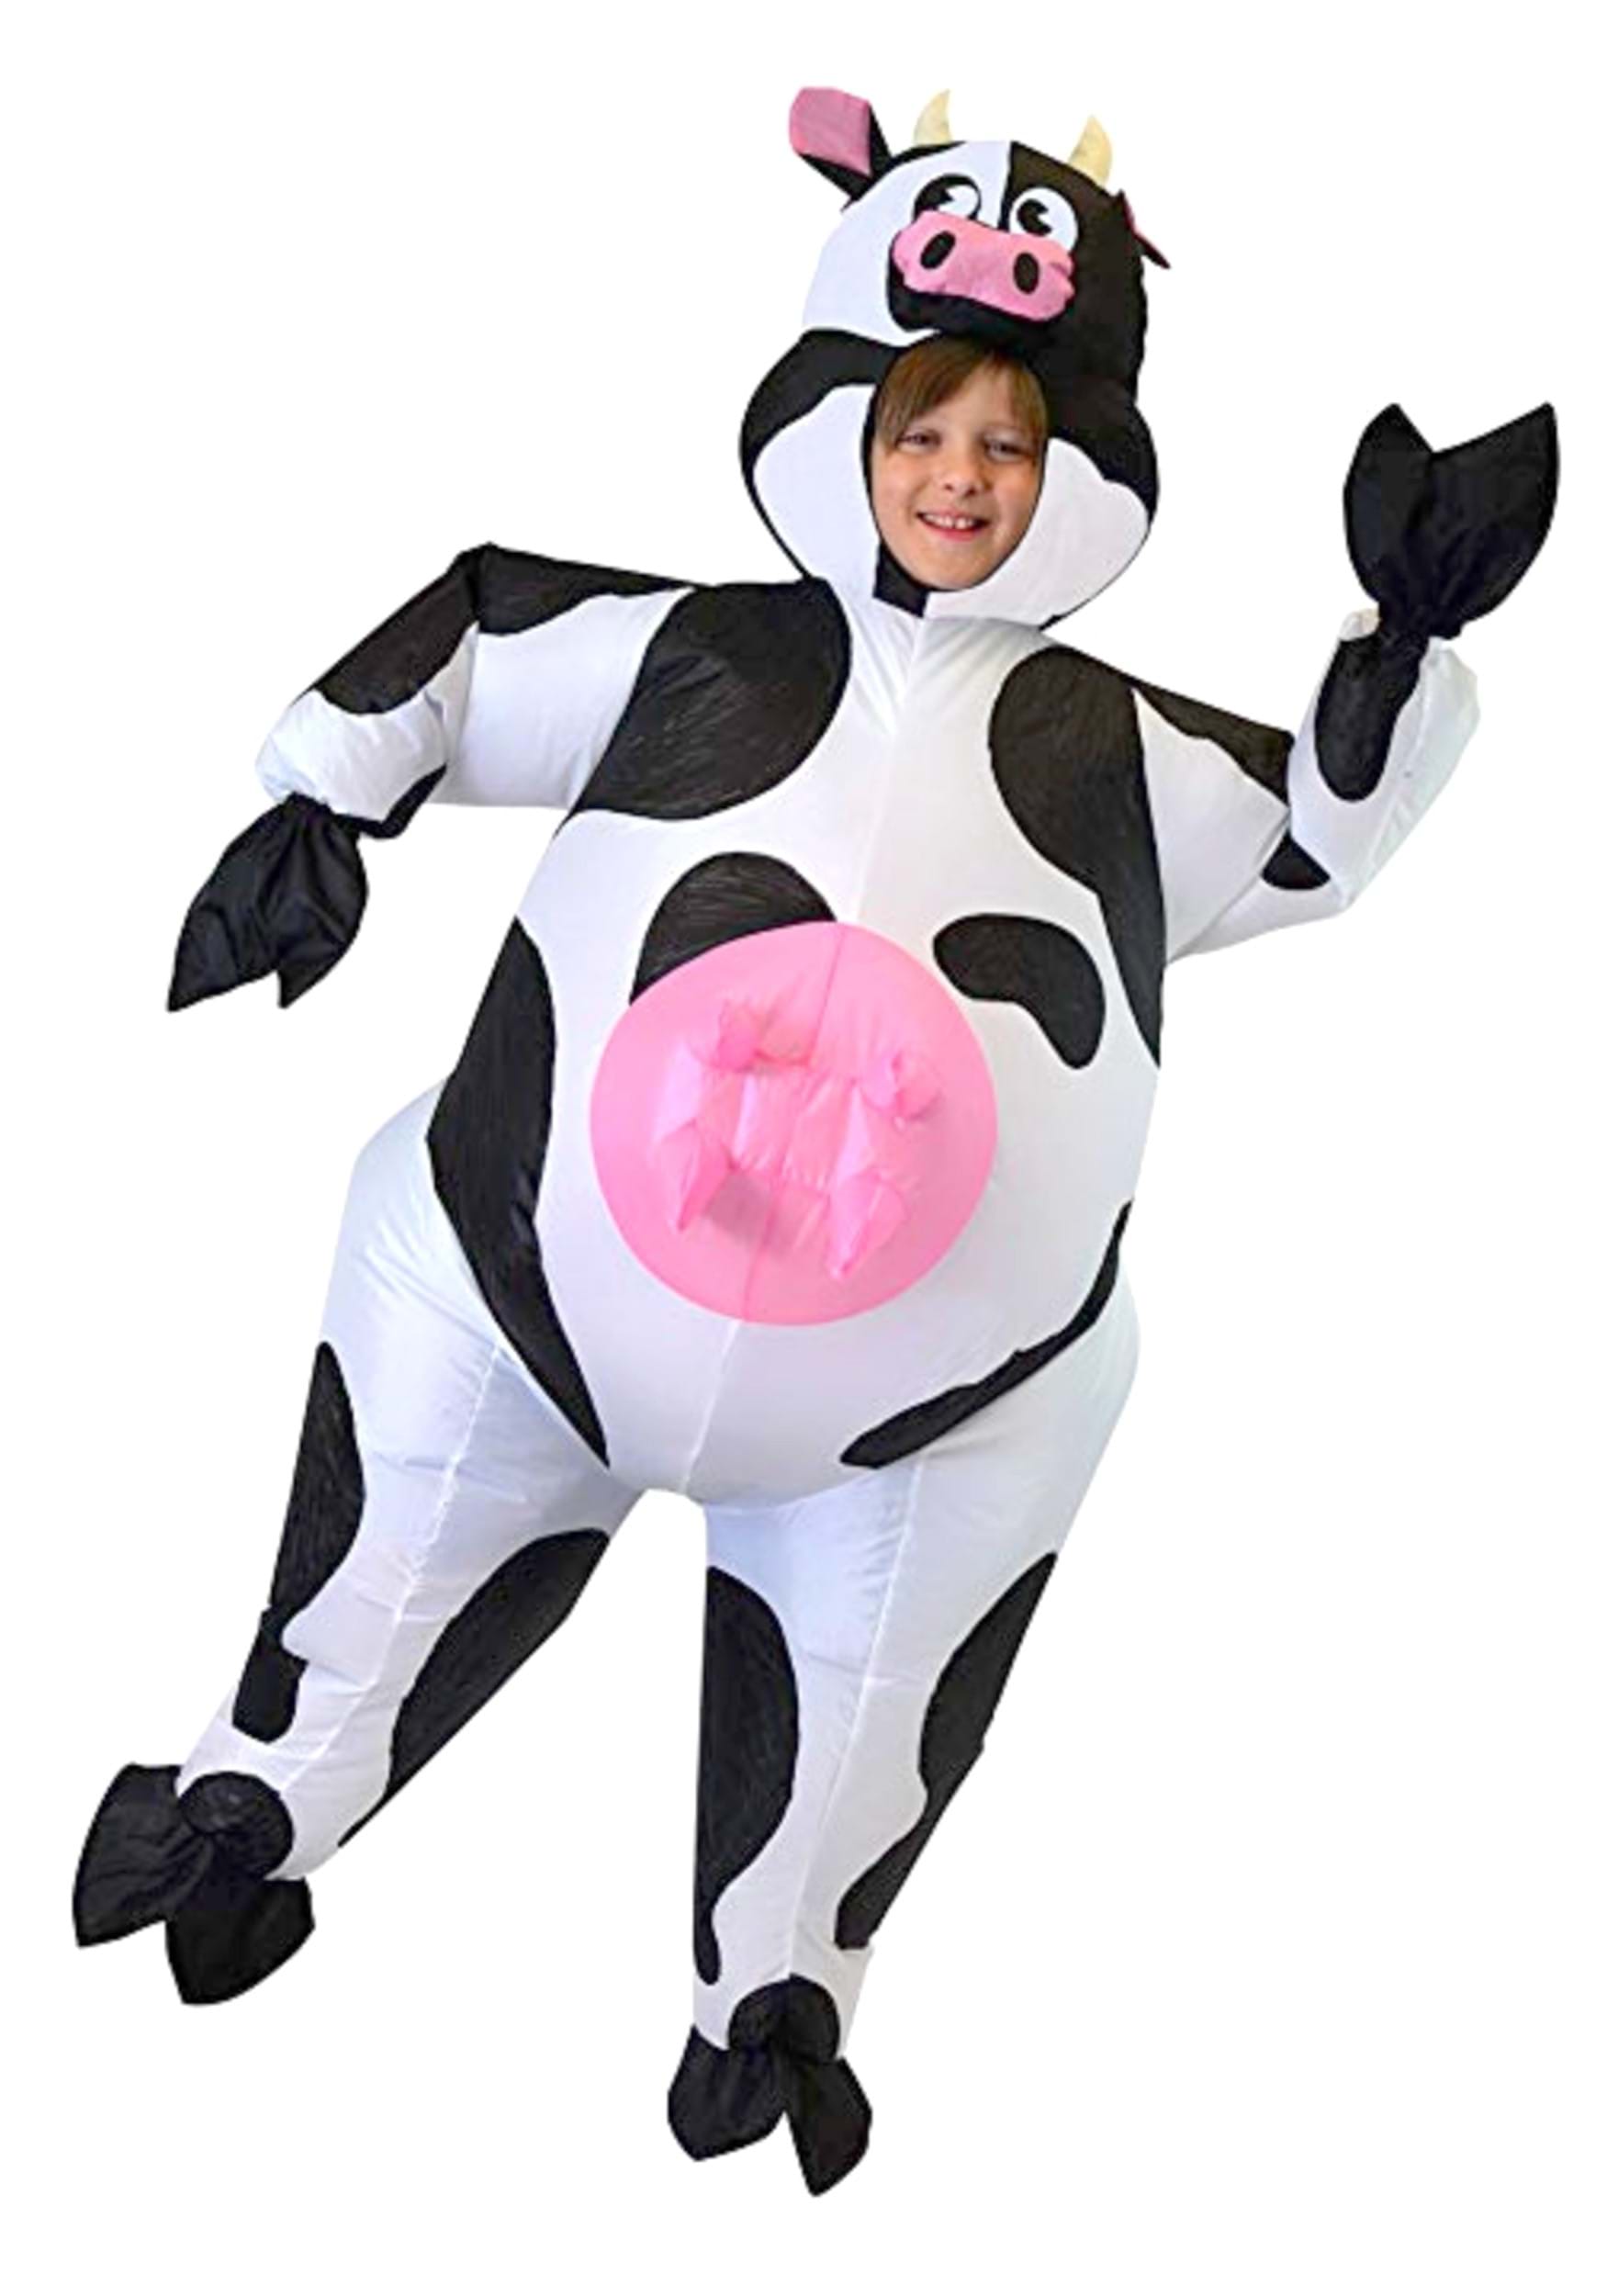 Best of Blow up cow costume